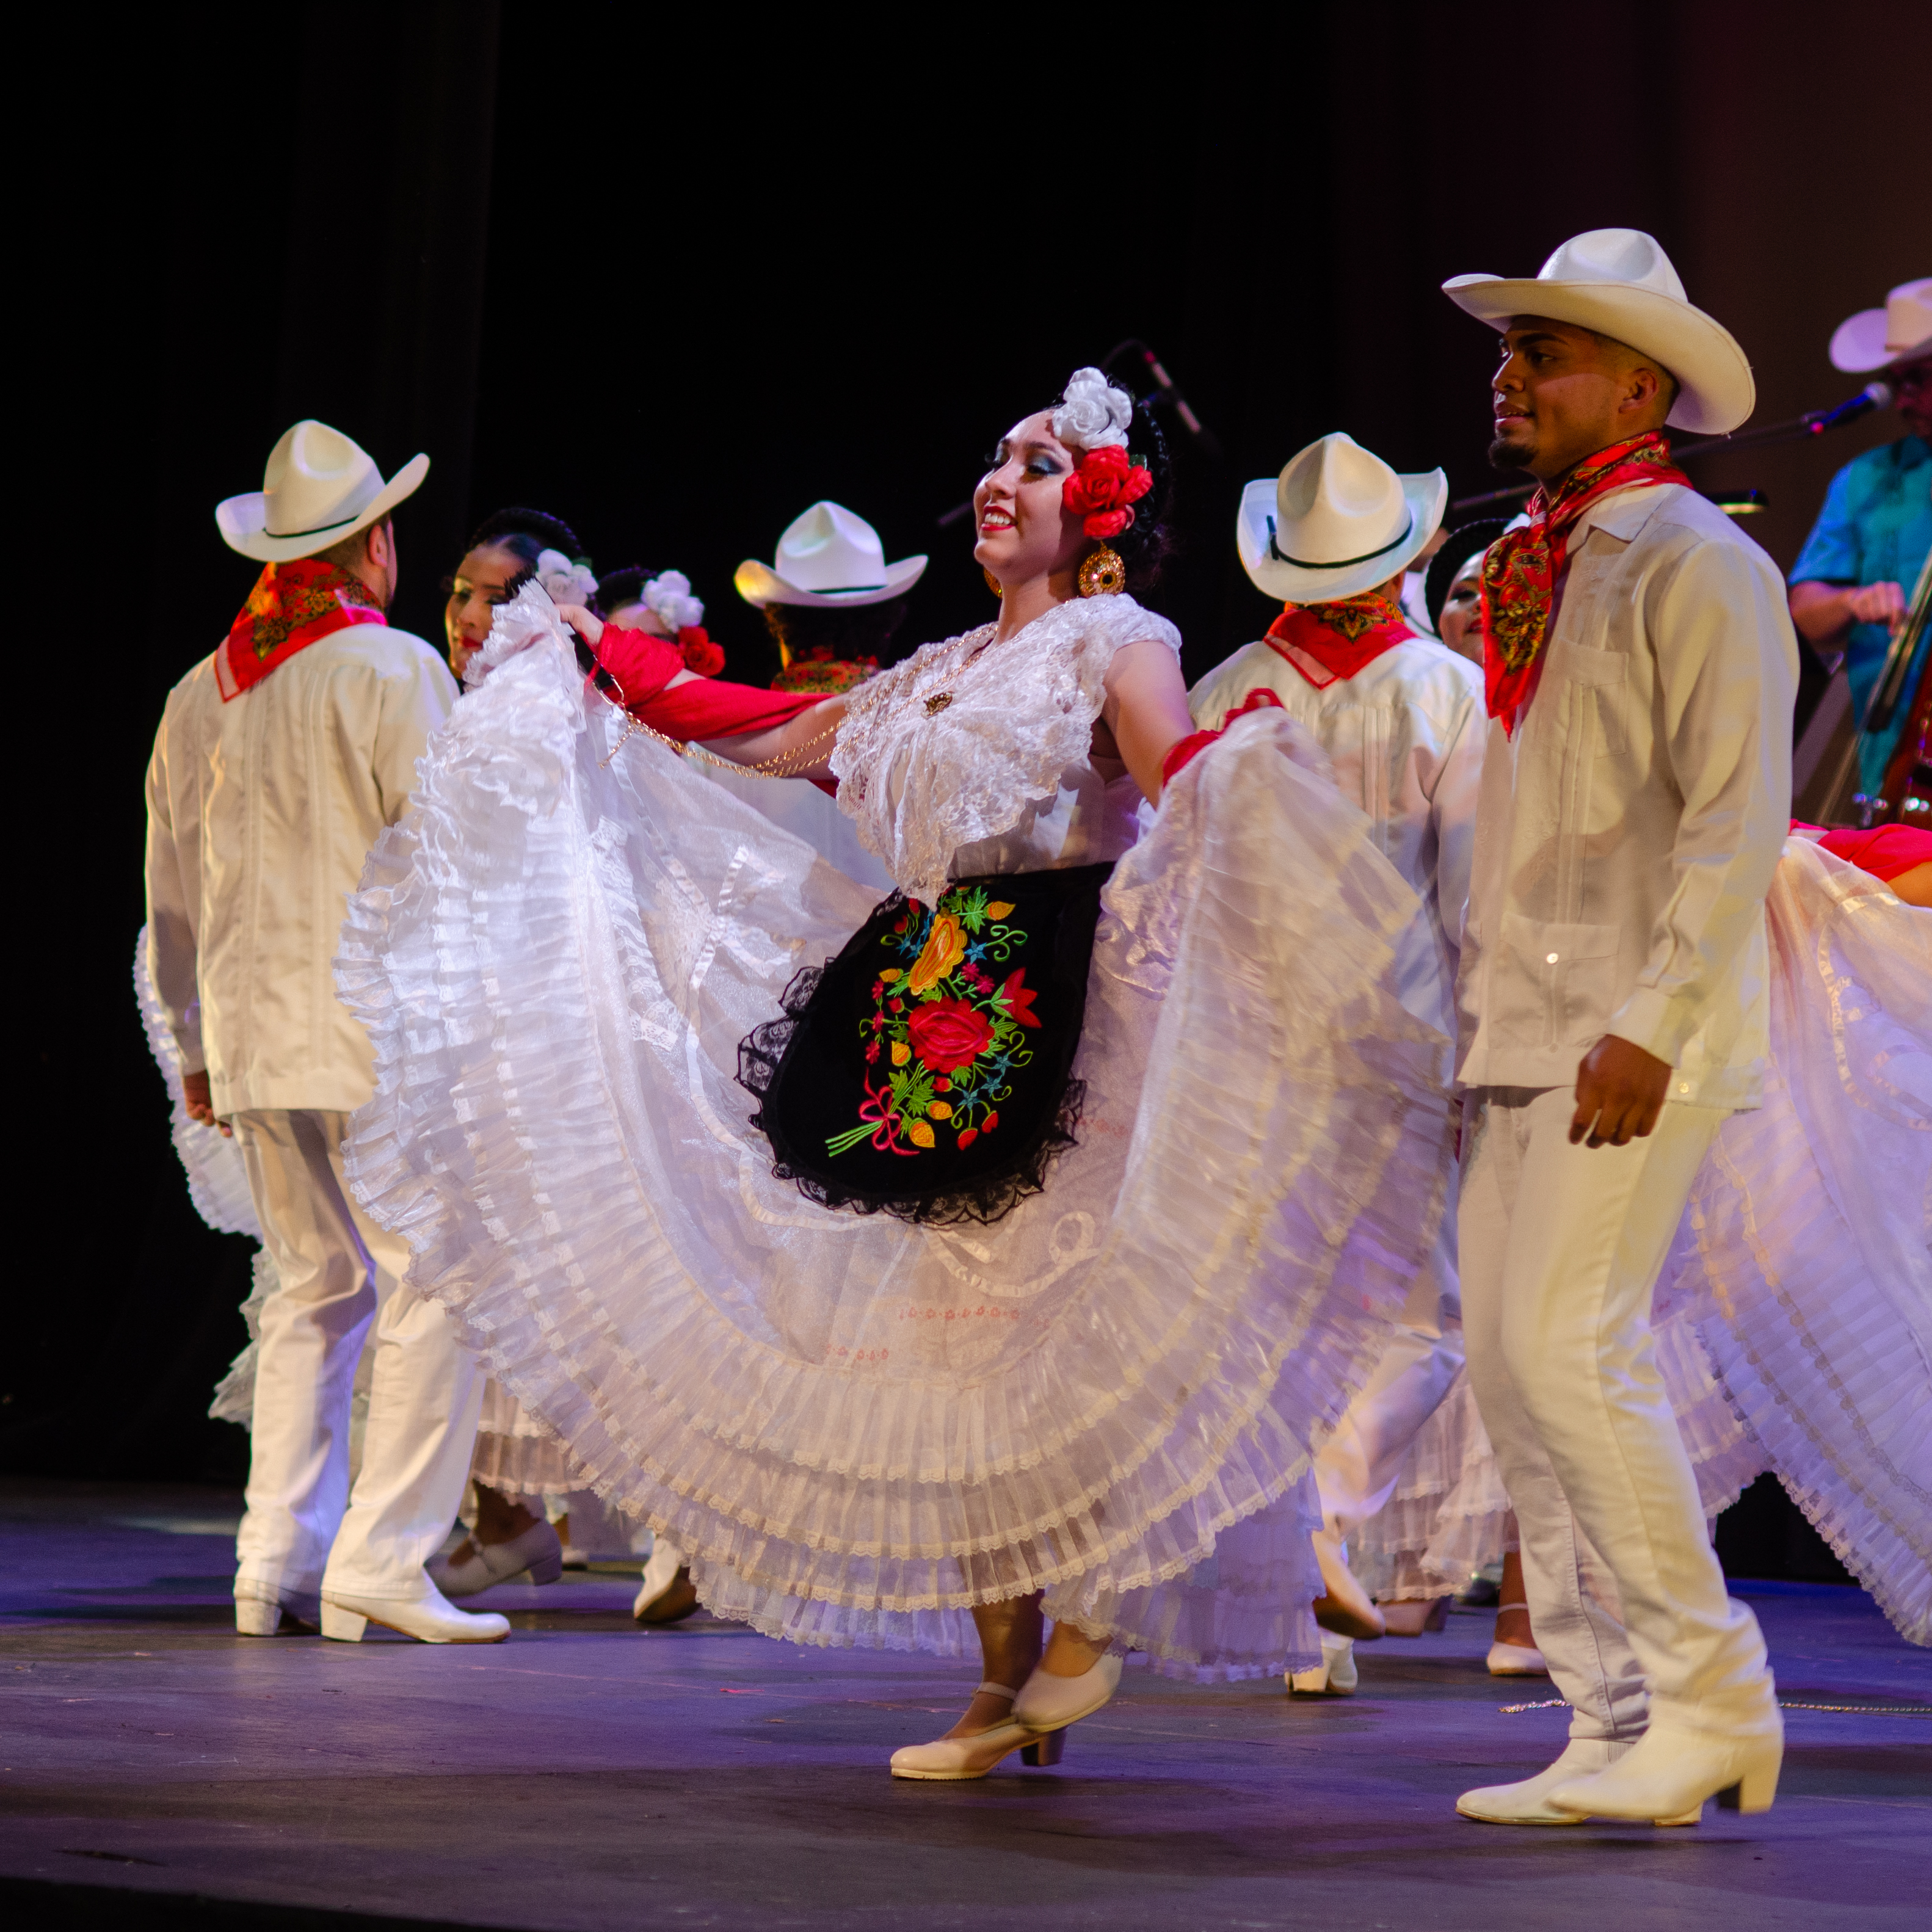 Mexican dancers performing a number from Veracruz